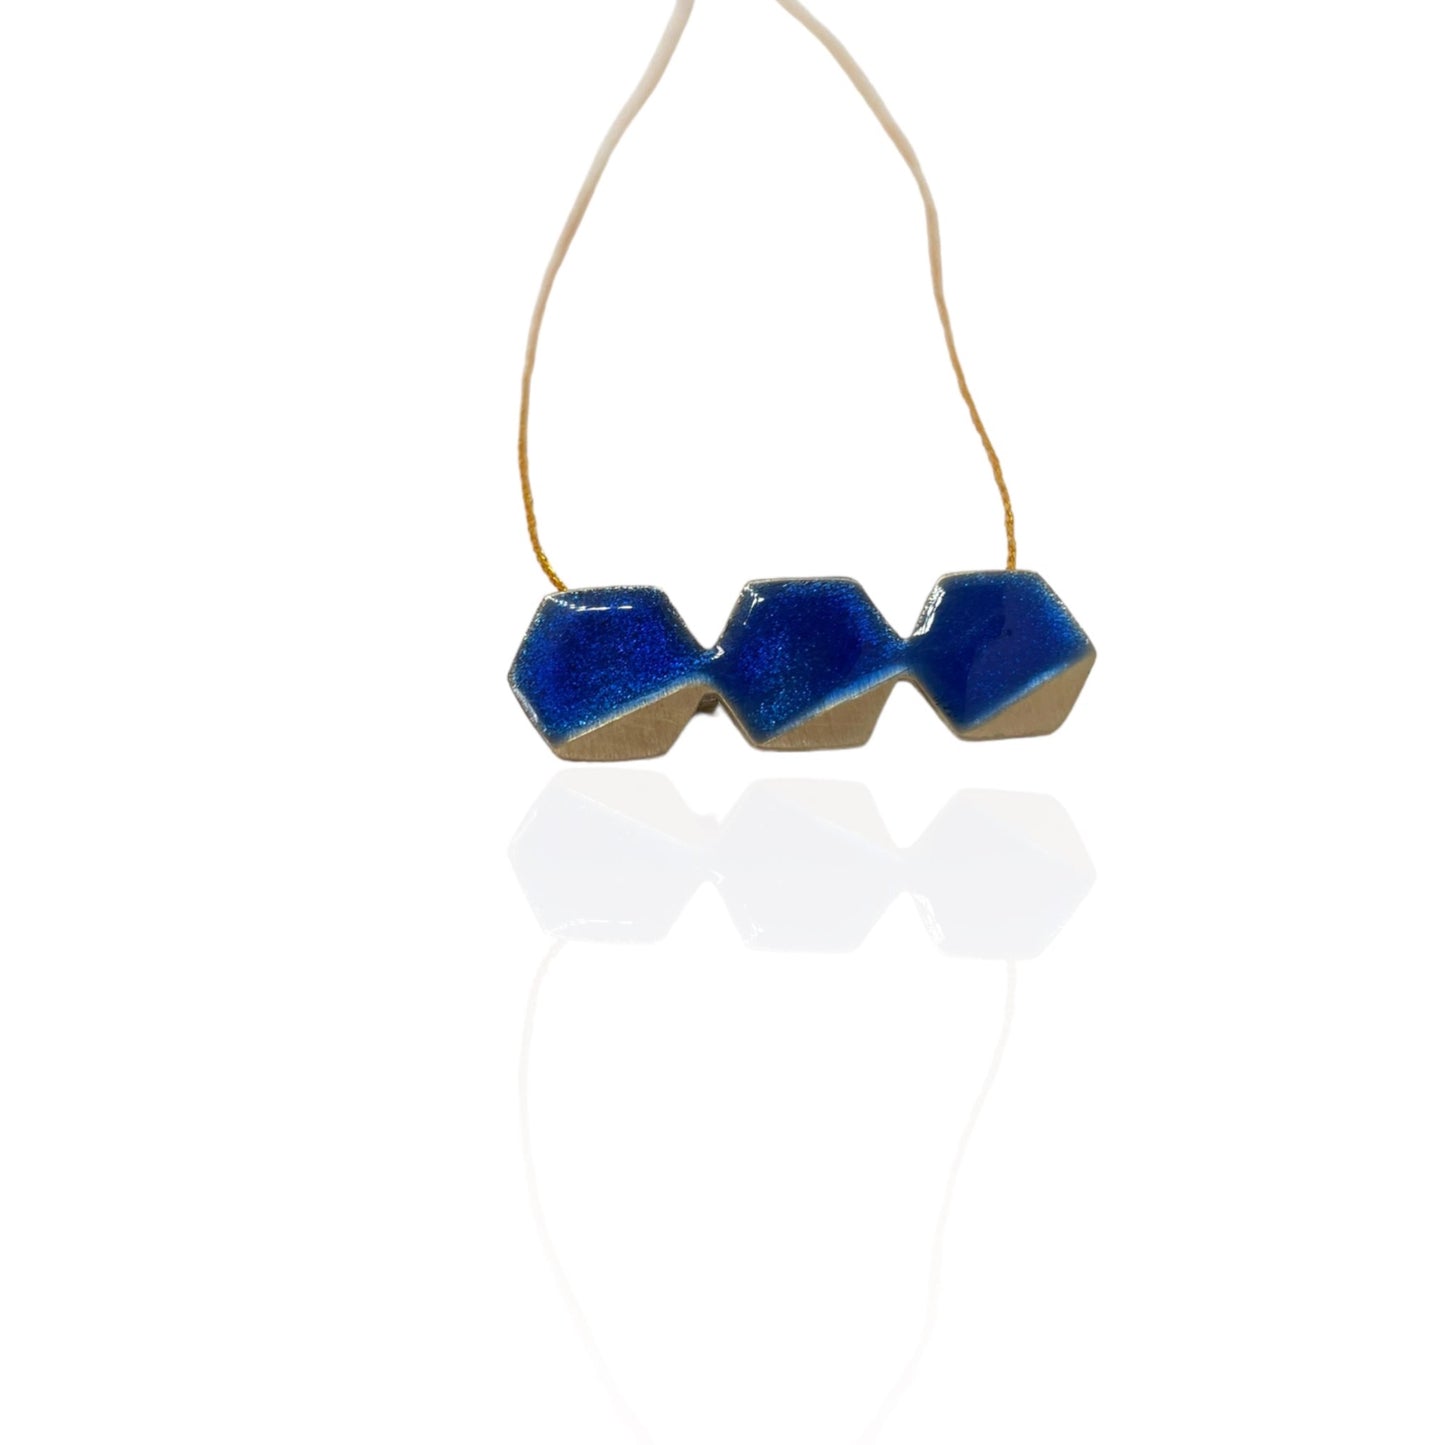 Brass necklace with resin | Successive Peaks Necklace